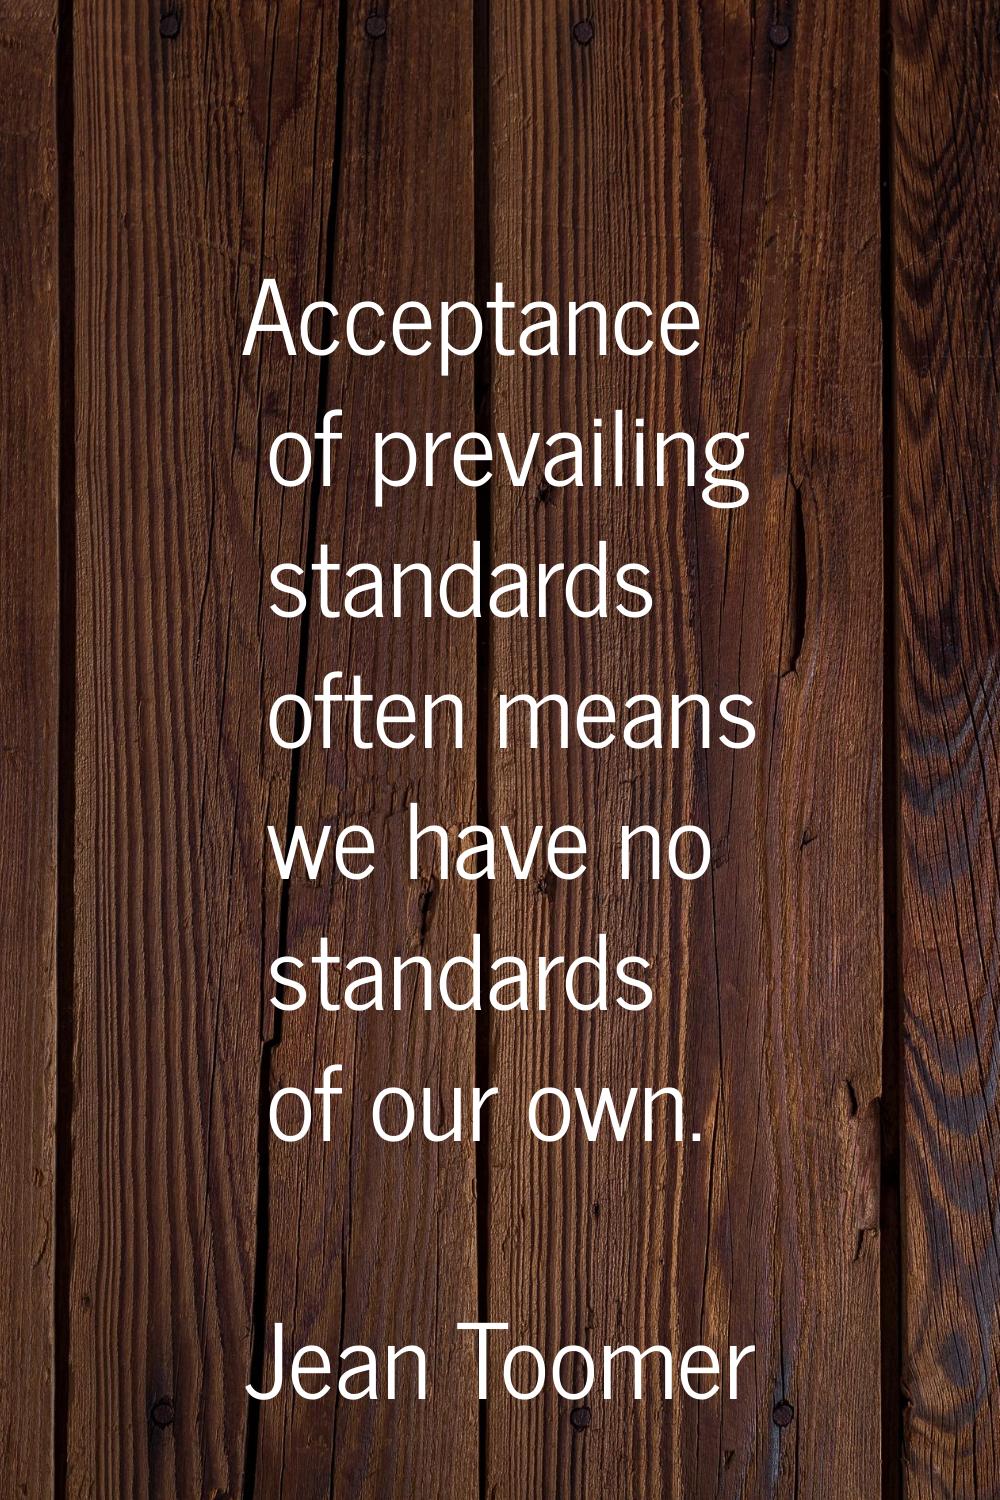 Acceptance of prevailing standards often means we have no standards of our own.